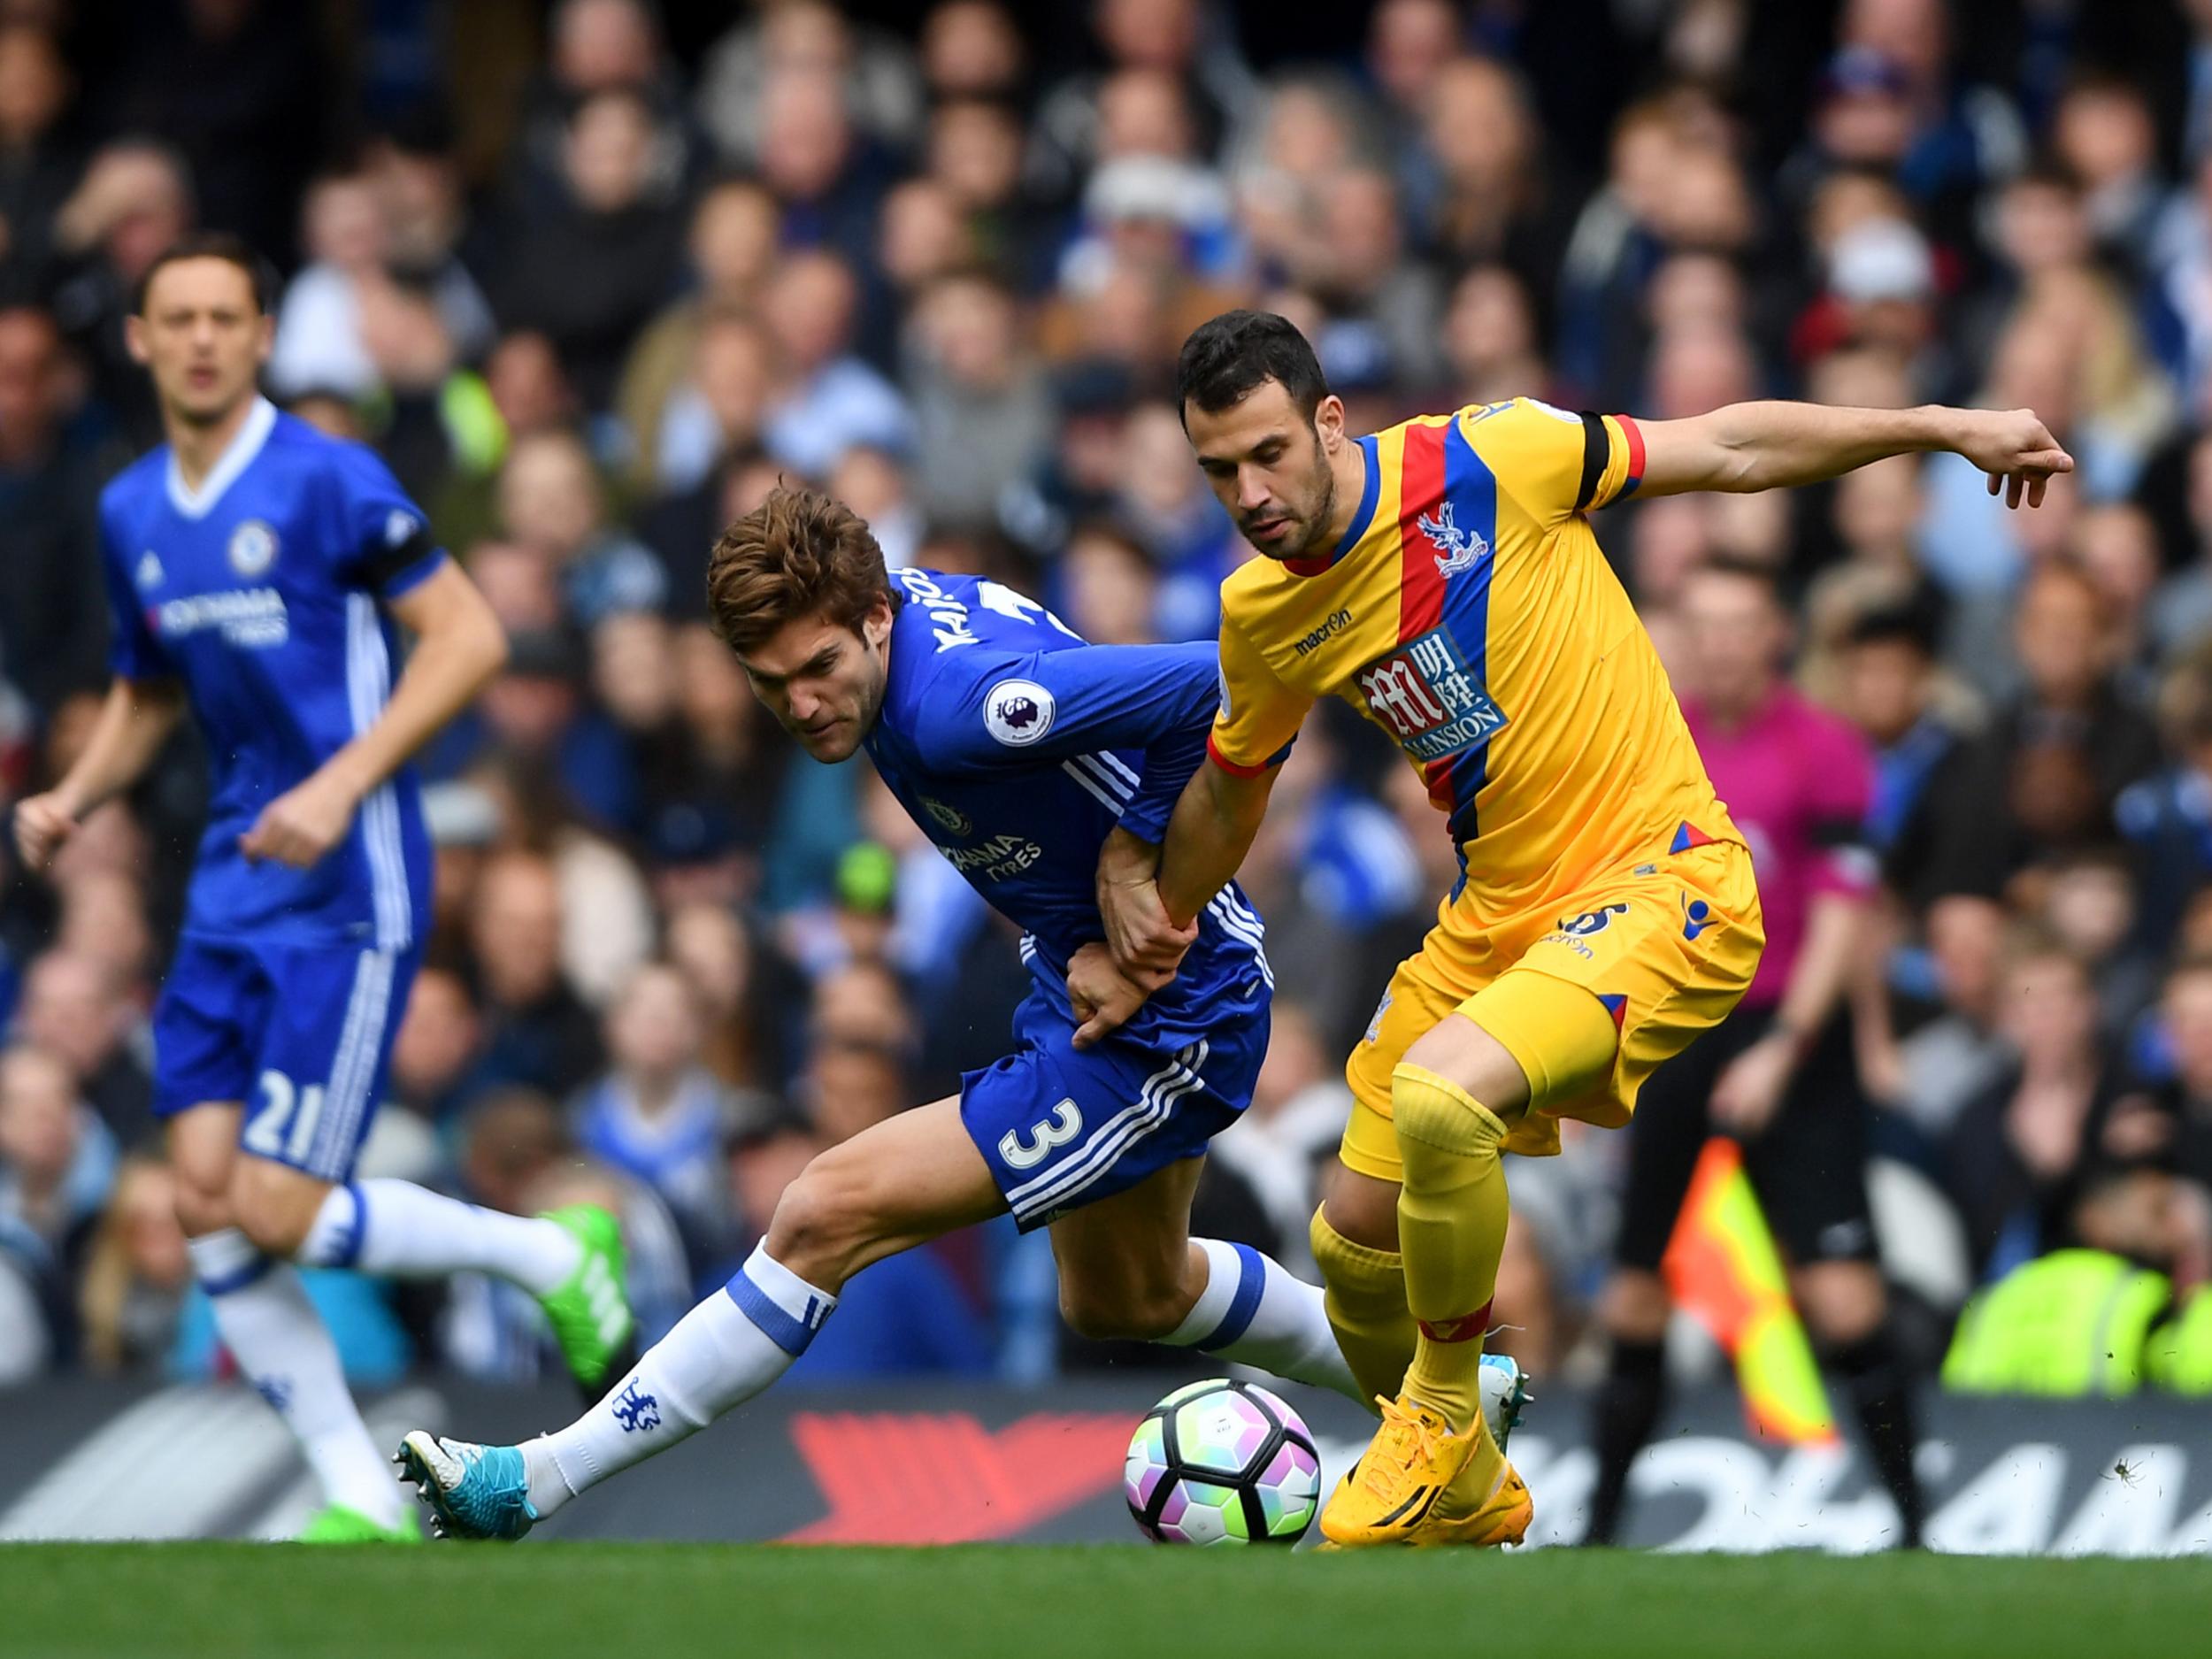 Milivojevic has impressed since moving to south west London